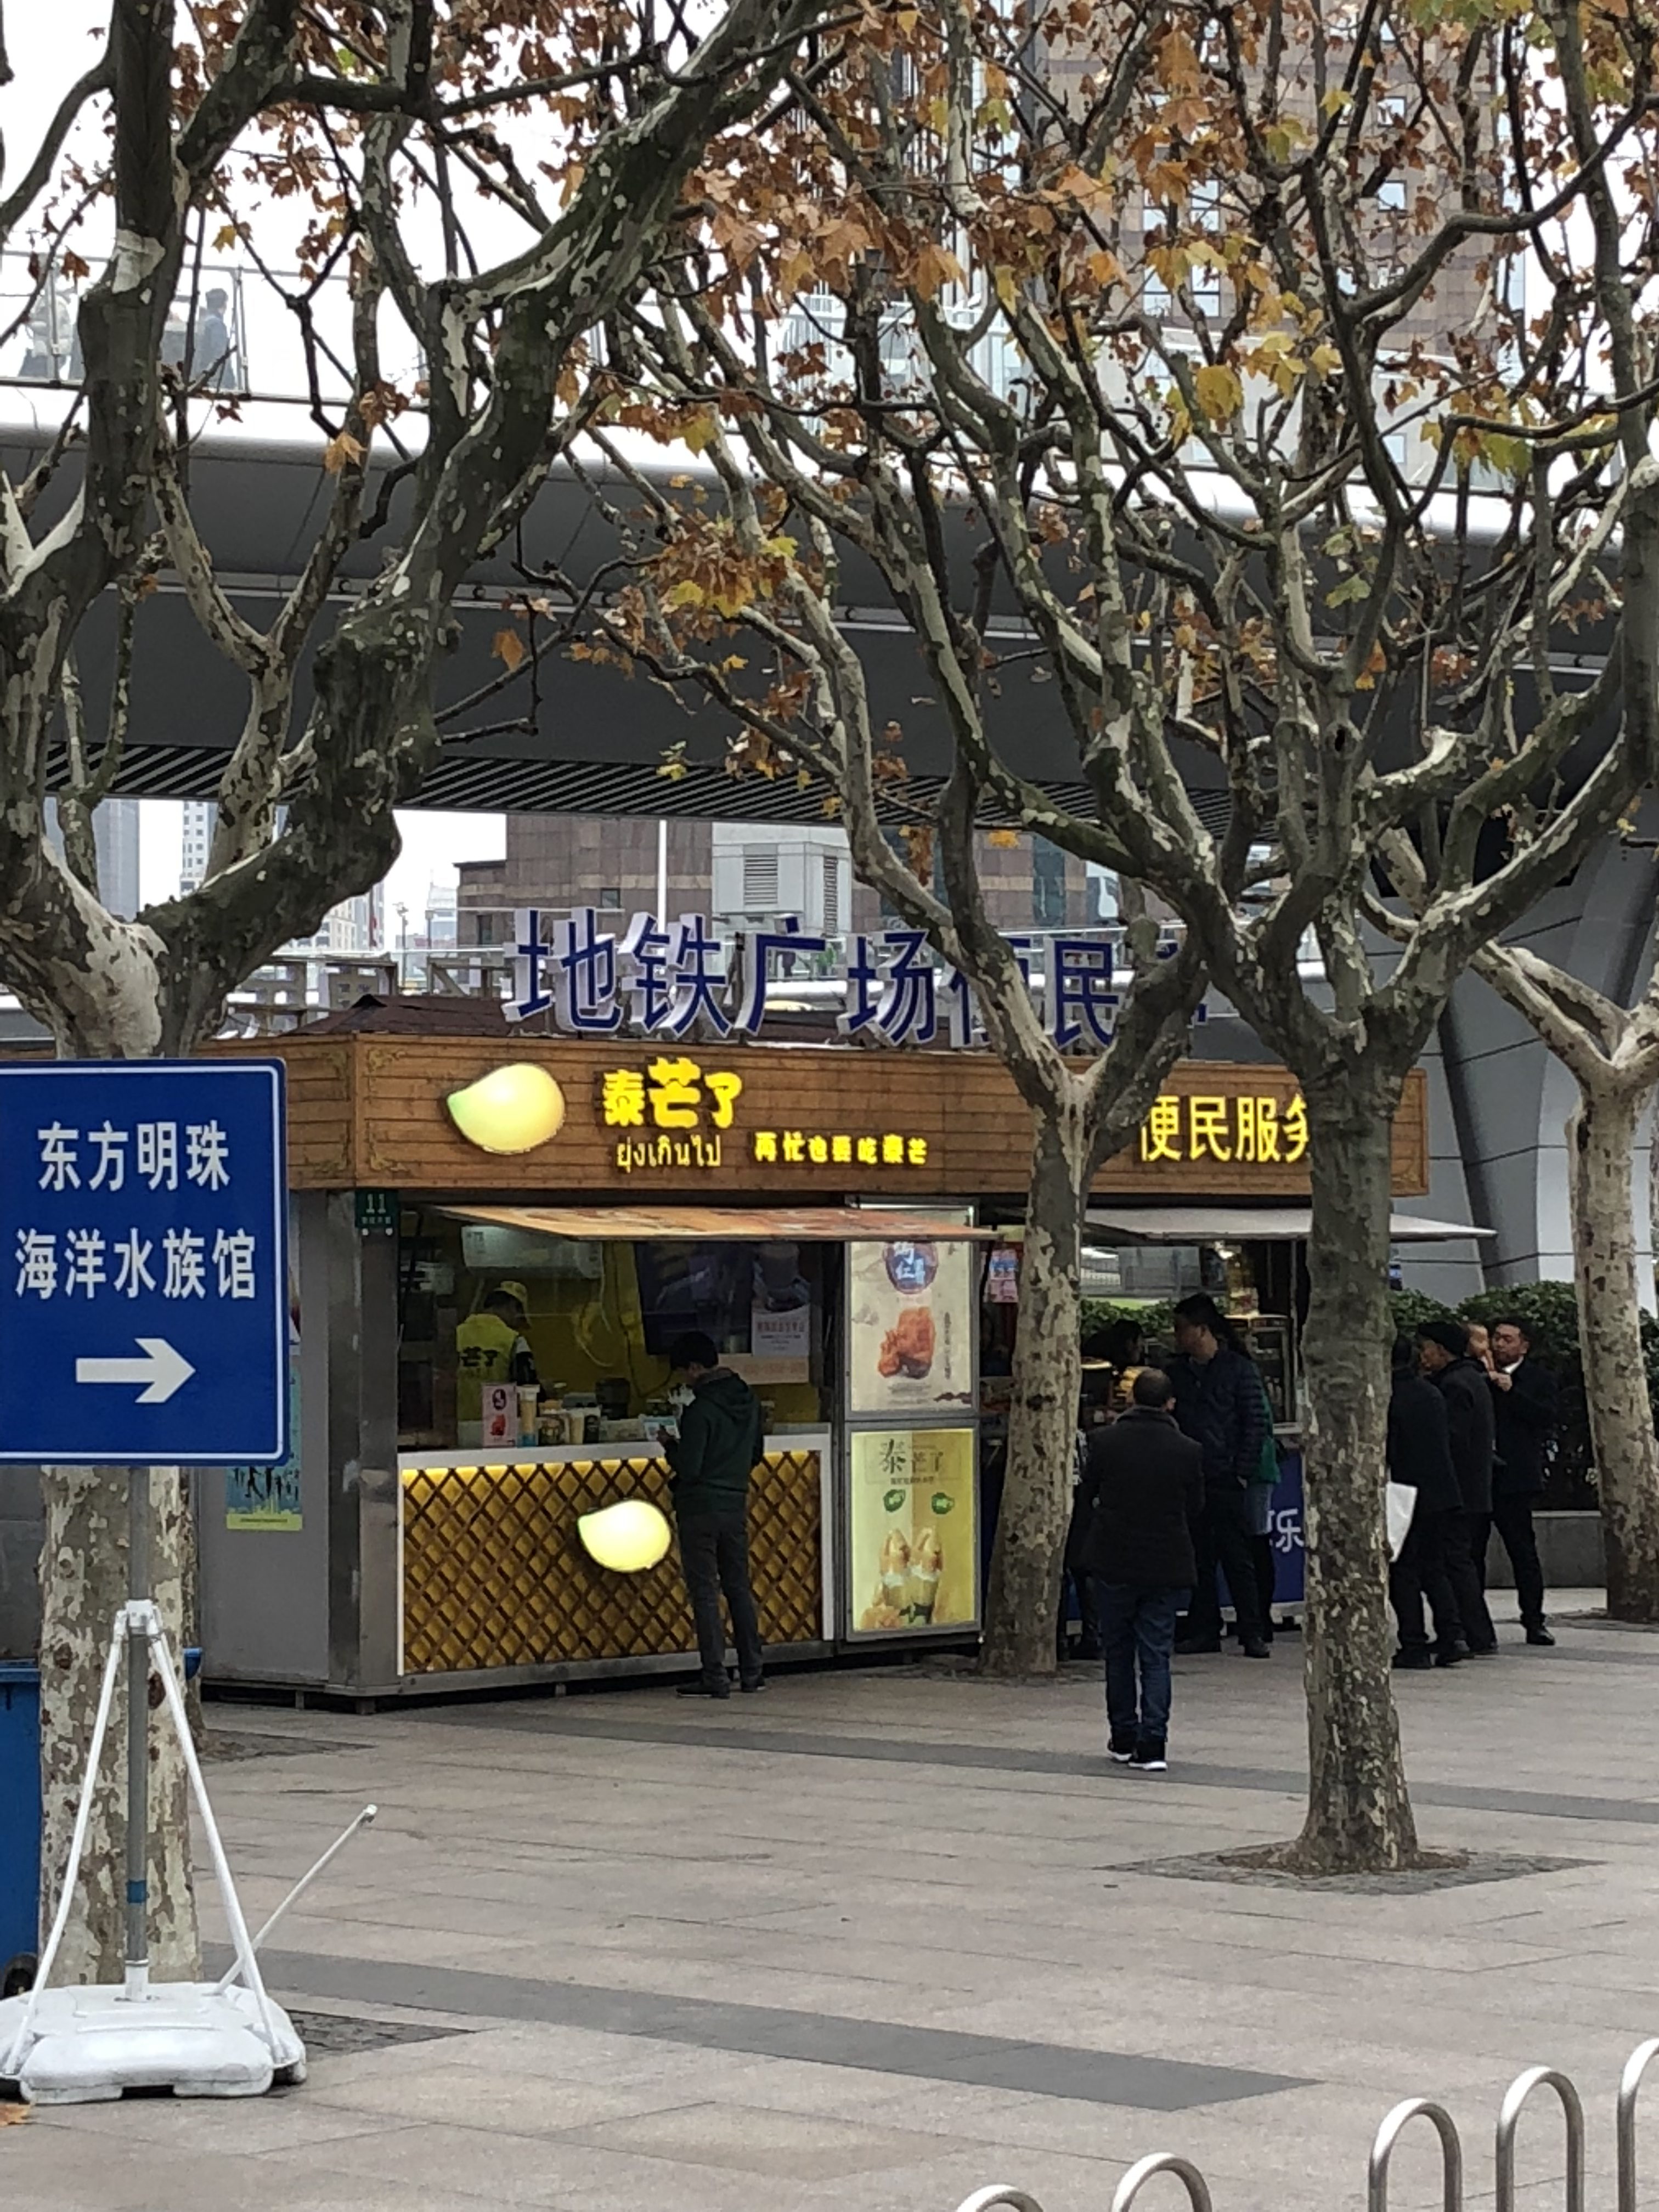 a food stand with people walking around